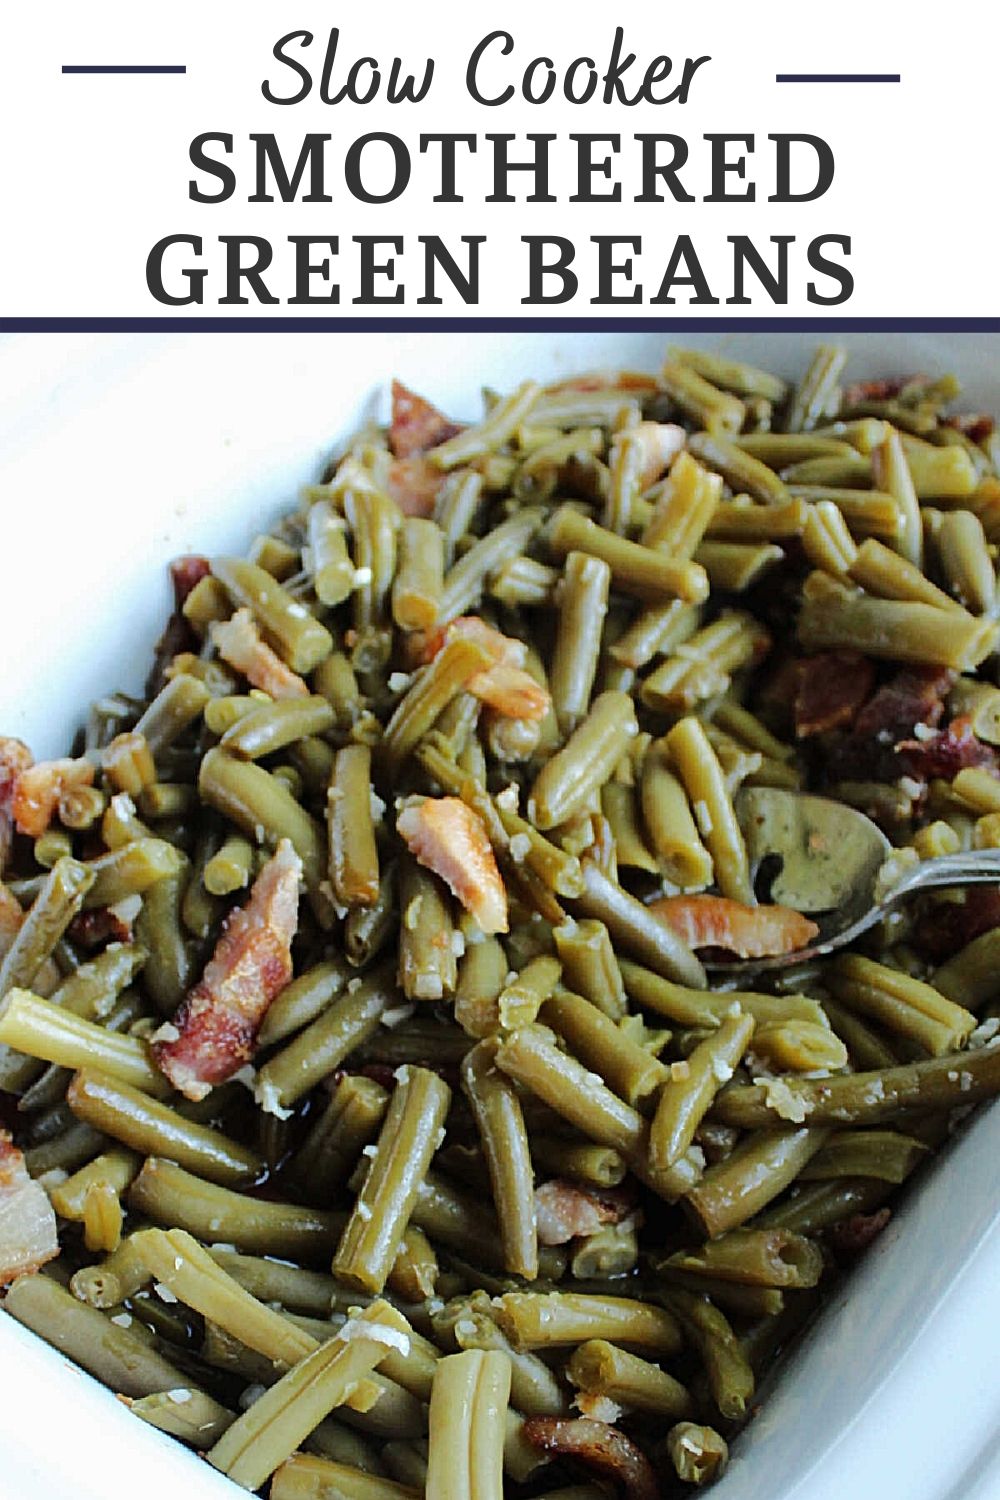 Slow cooker smothered green beans are the perfect side dish for almost any meal. They are easy to make, have a great sweet and sour sauce and plenty of bacon to make them extra tasty!